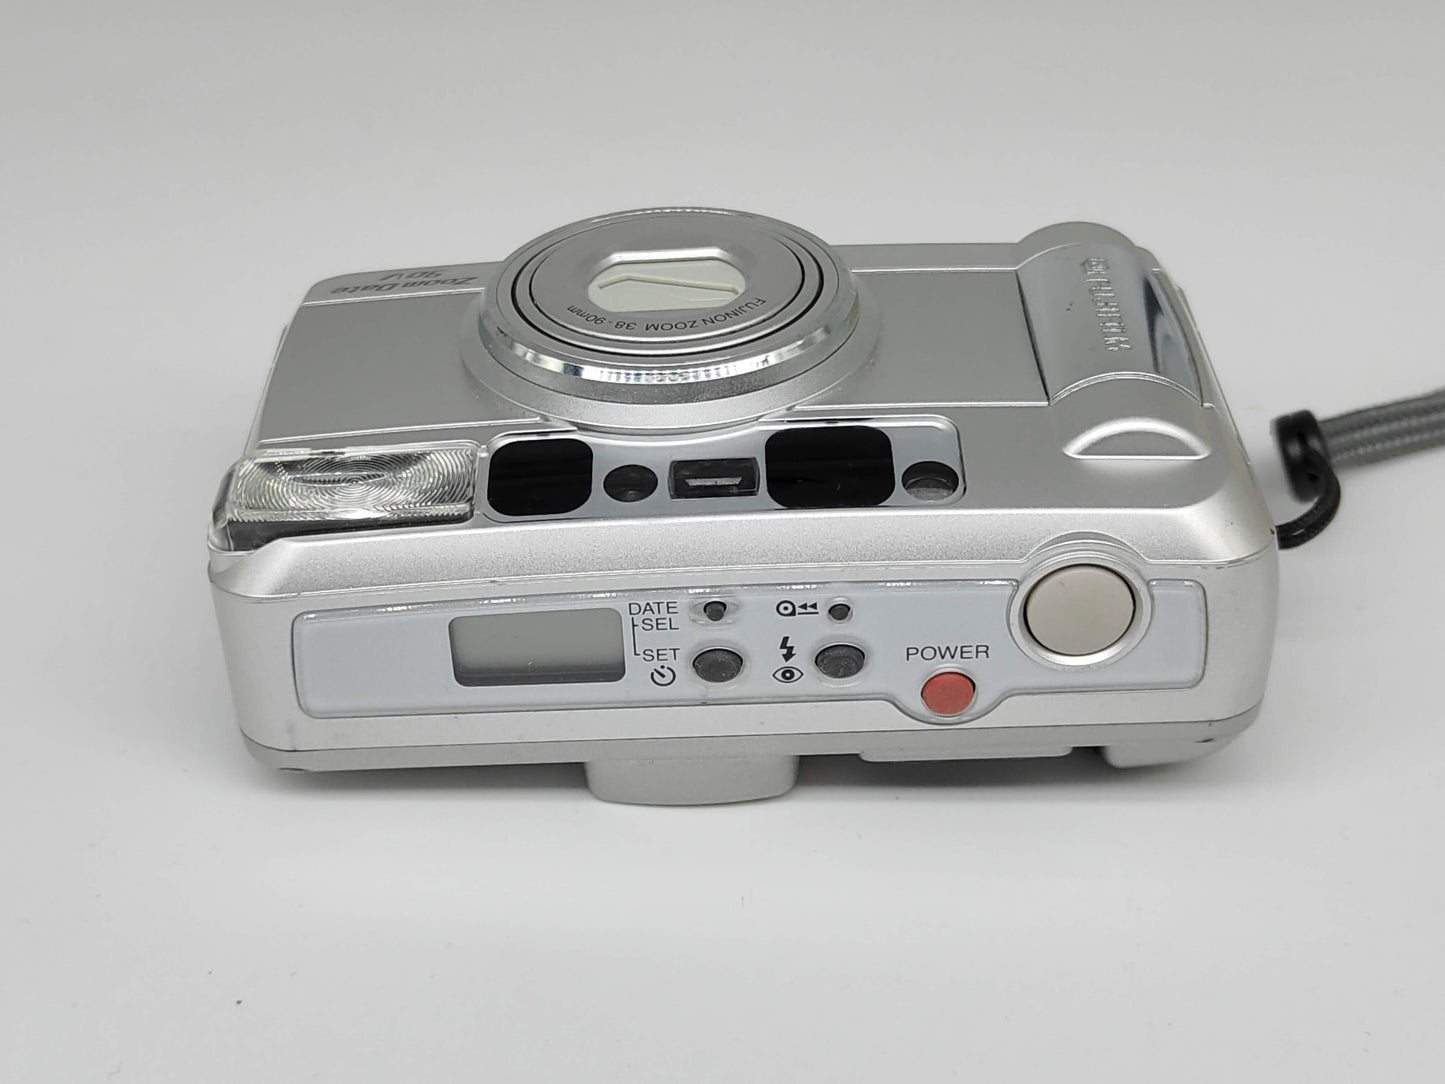 Fuji Zoom Date 90V point-and-shoot film camera